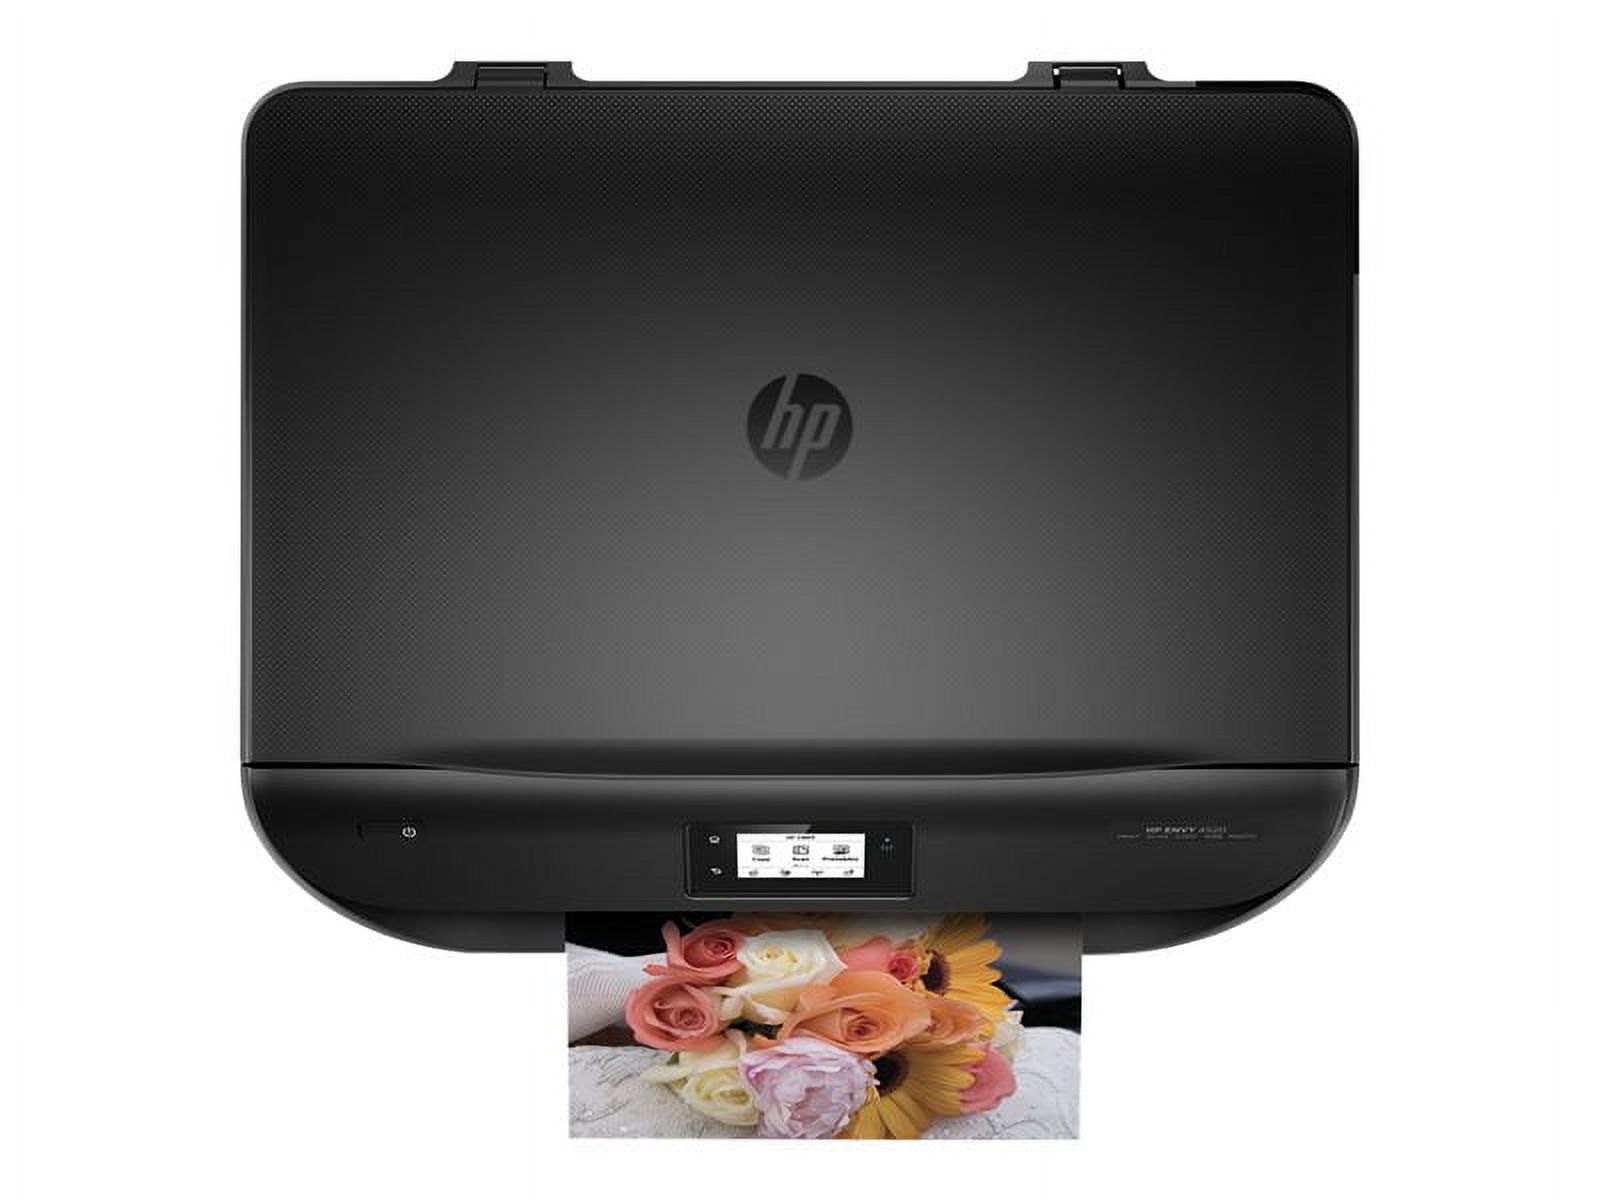 HP Envy 4520 All-in-One - multifunction printer (color) - image 2 of 33